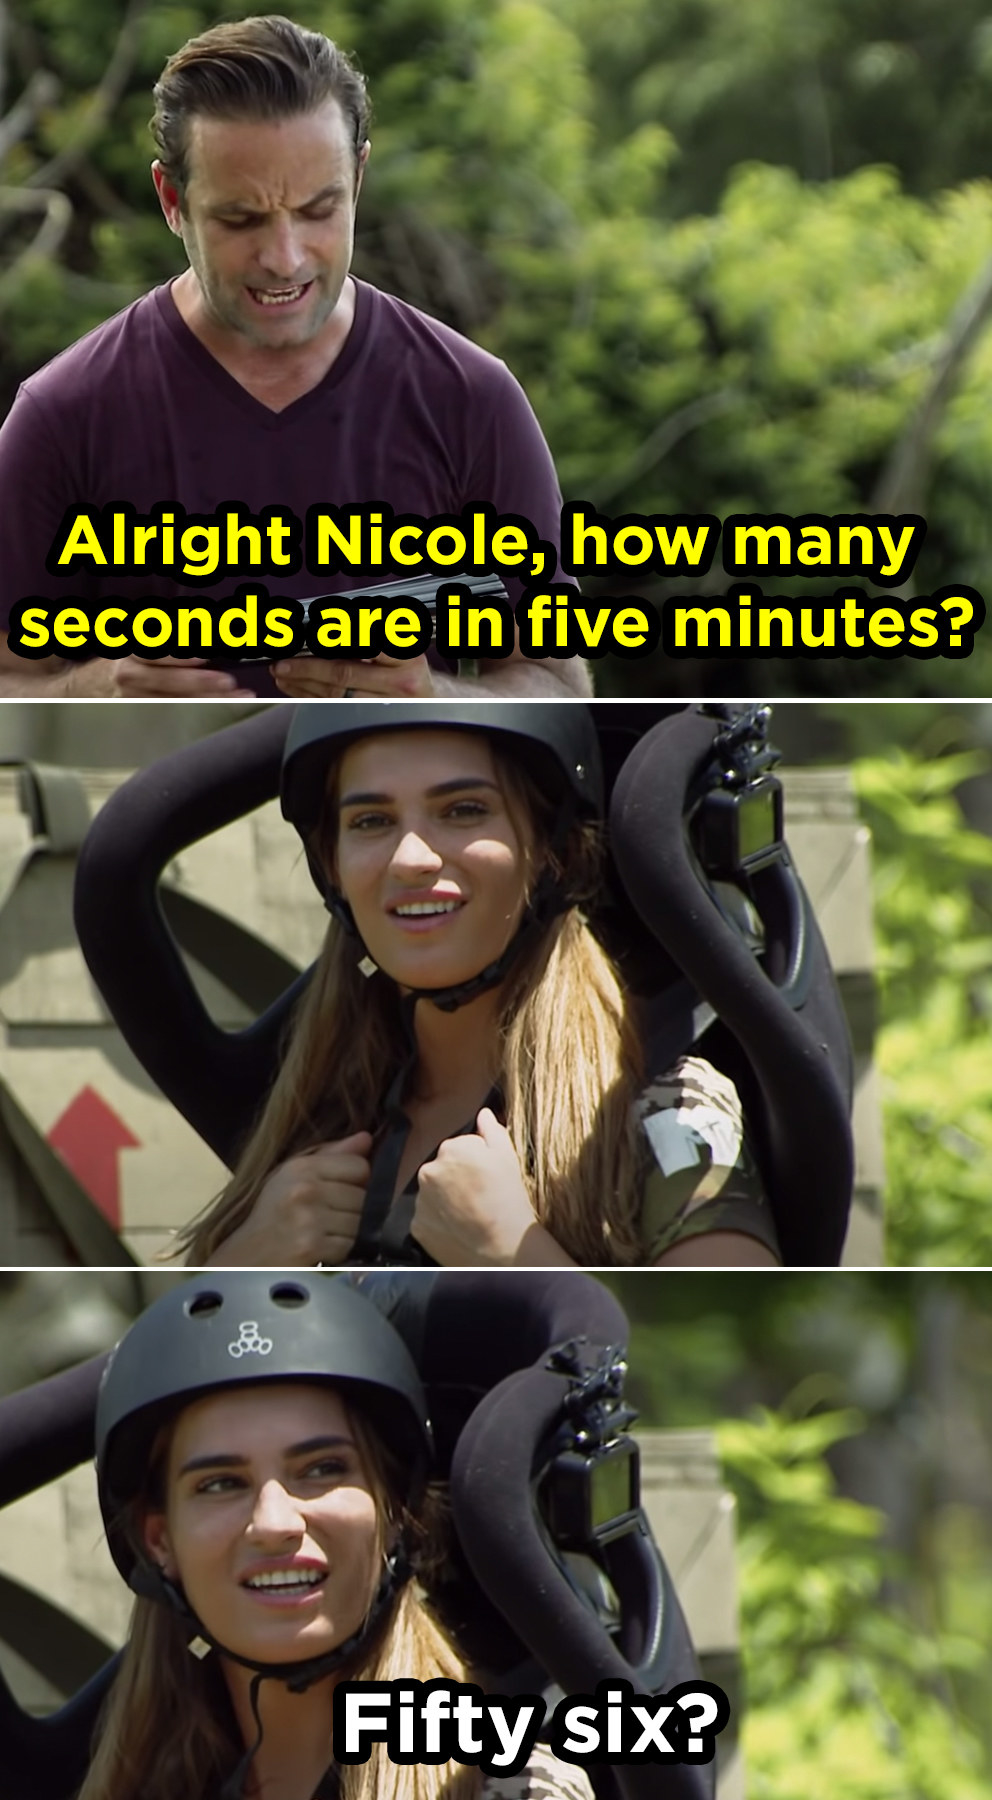 a man with notecards says &quot;how many seconds are in five minutes?&quot; while a girl in a helmet says &quot;fifty six?&quot;